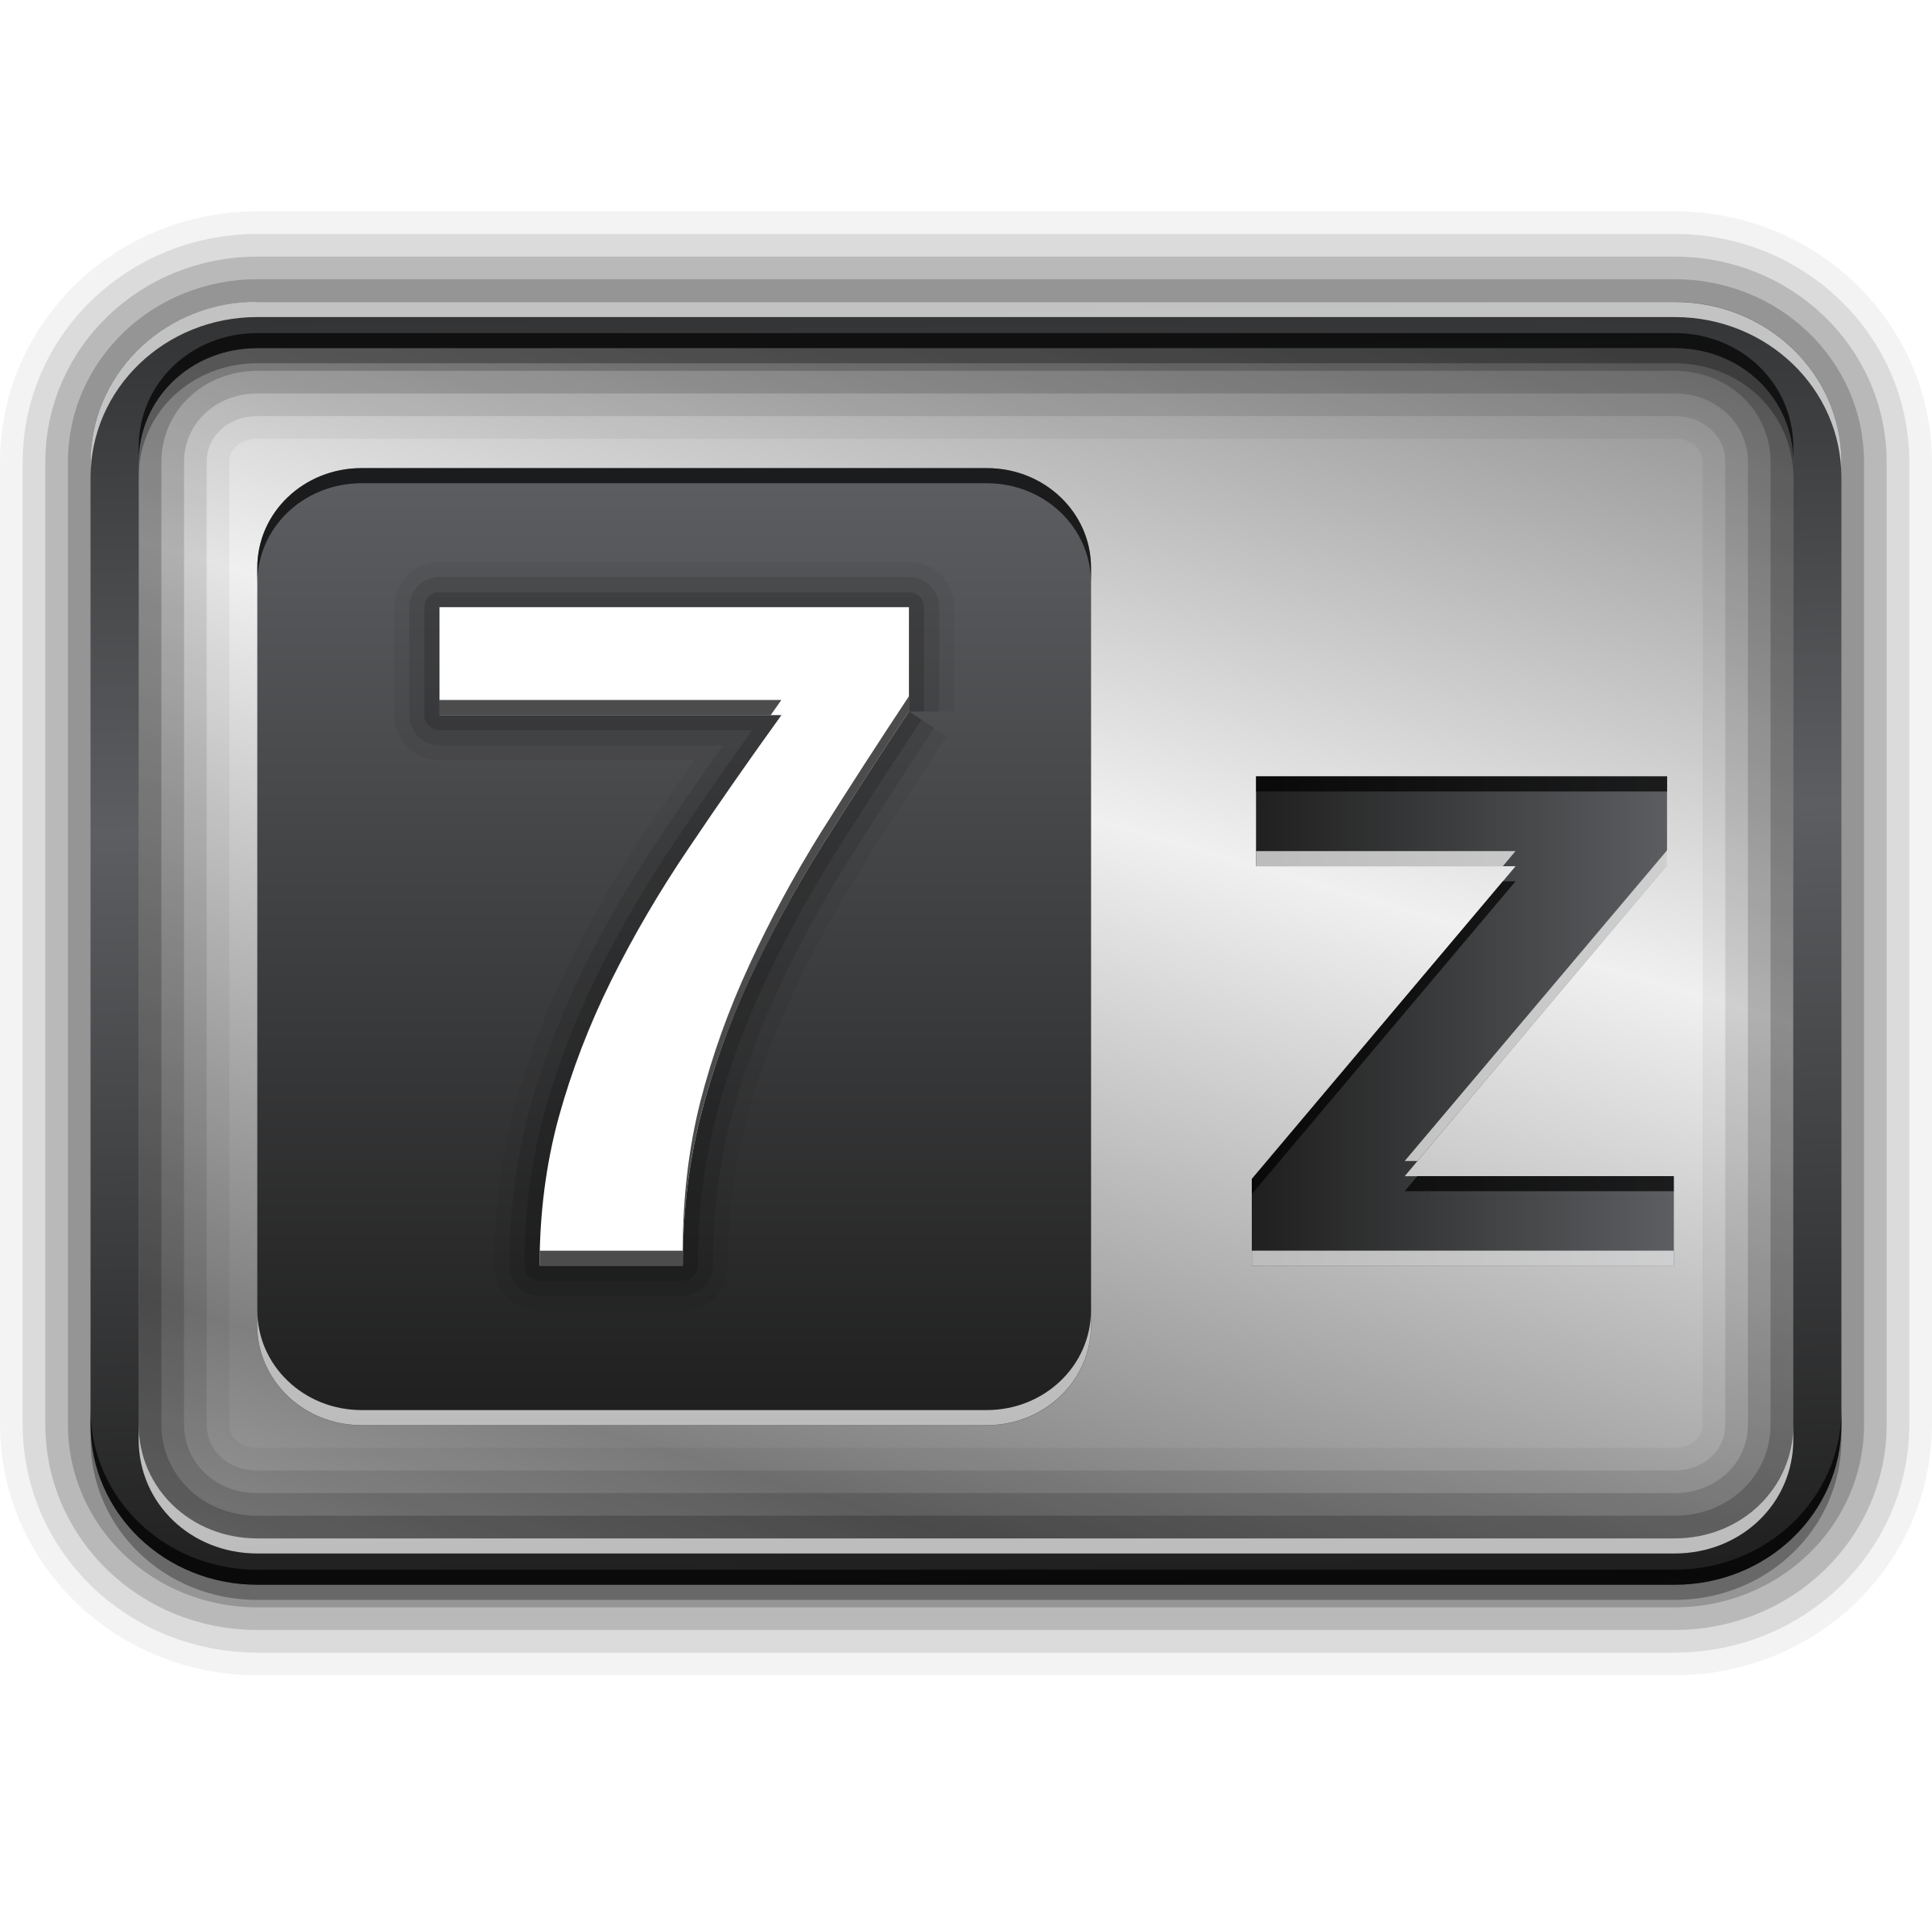 Files 7zip icon free download as PNG and ICO formats, VeryIcon.com